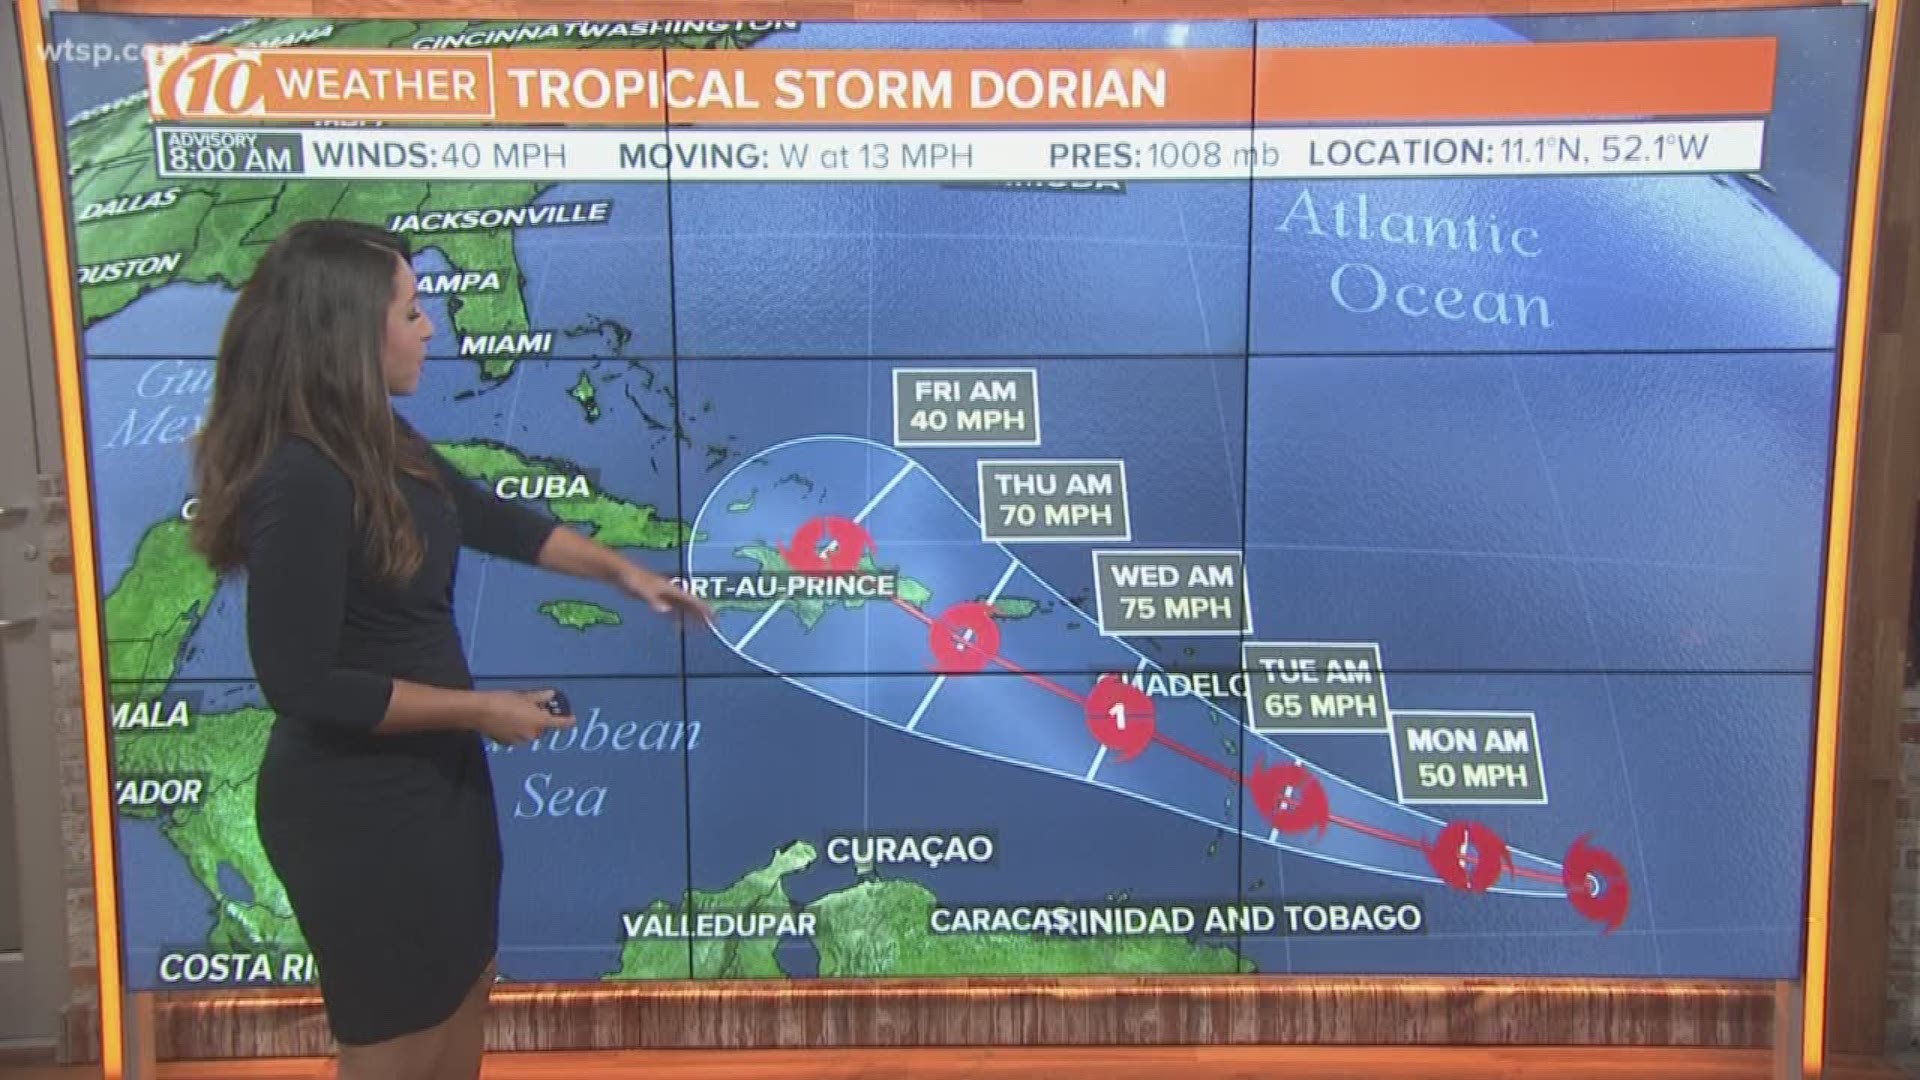 The National Hurricane Center is tracking a newly formed tropical storm in the Atlantic Ocean. Weather forecast models say that Tropical Storm Dorian could develop into Category 1 hurricane as soon as Tuesday upon reaching the Caribbean islands. However, it so far appears any strengthening into a hurricane might not last long because of unfavorable conditions across that region.